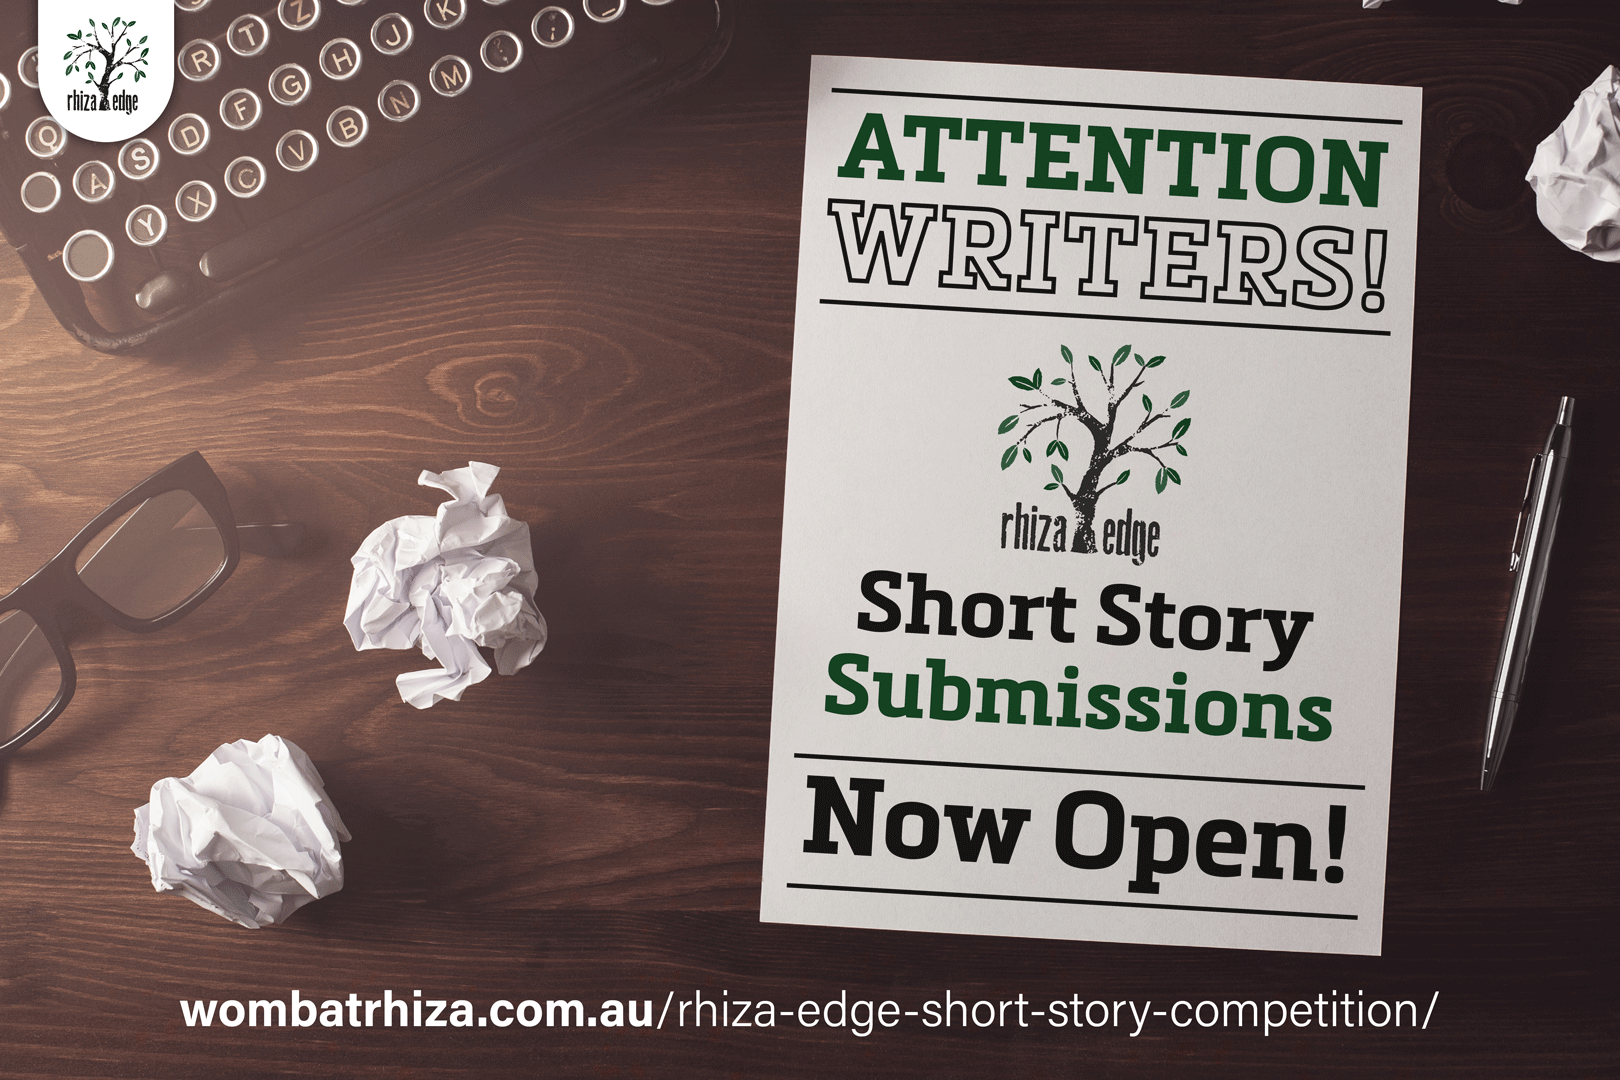 Rhiza Edge Short Story Competition Now Open